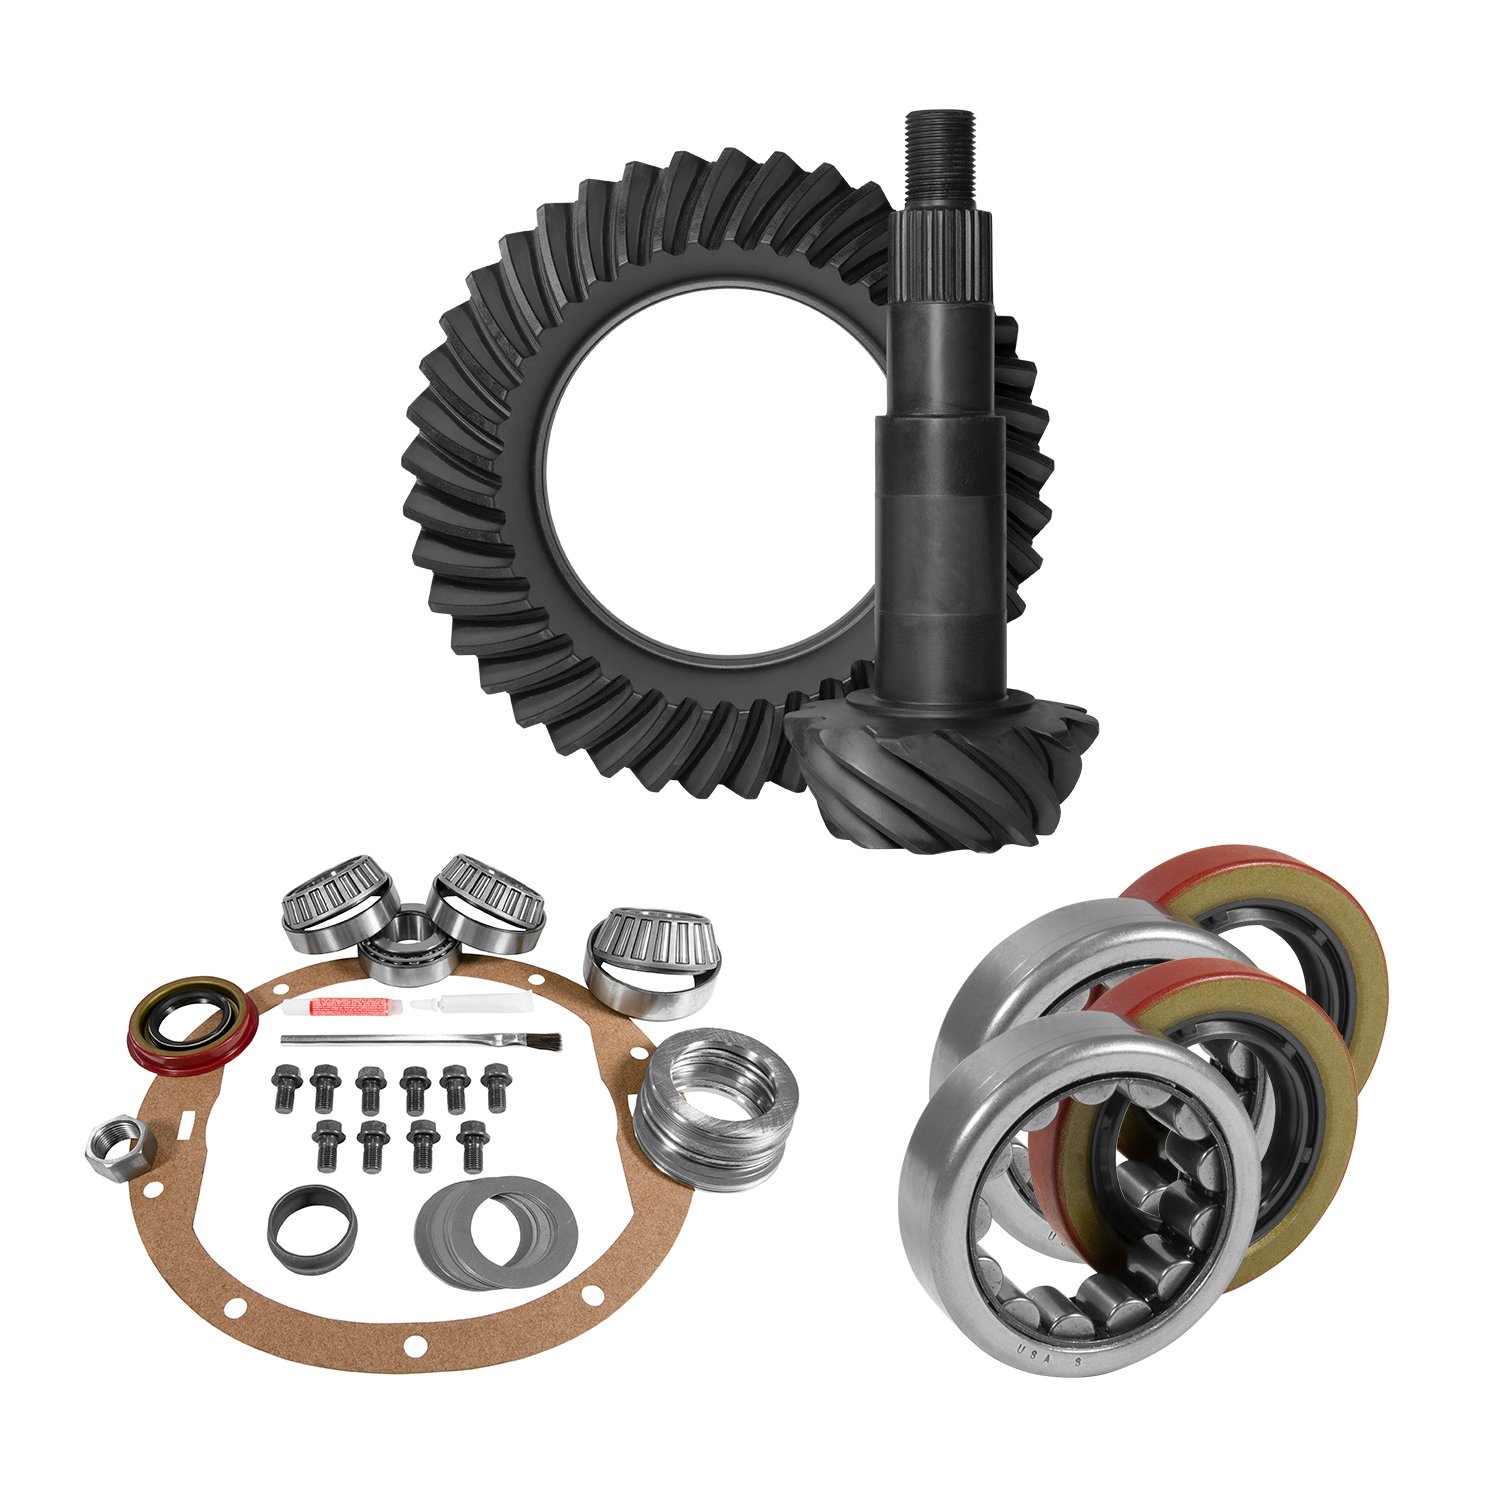 USA Standard 10665 8.2 in. GM 3.55 Rear Ring & Pinion Install Kit, 2.25 in. Od Axle Bearings & Seals